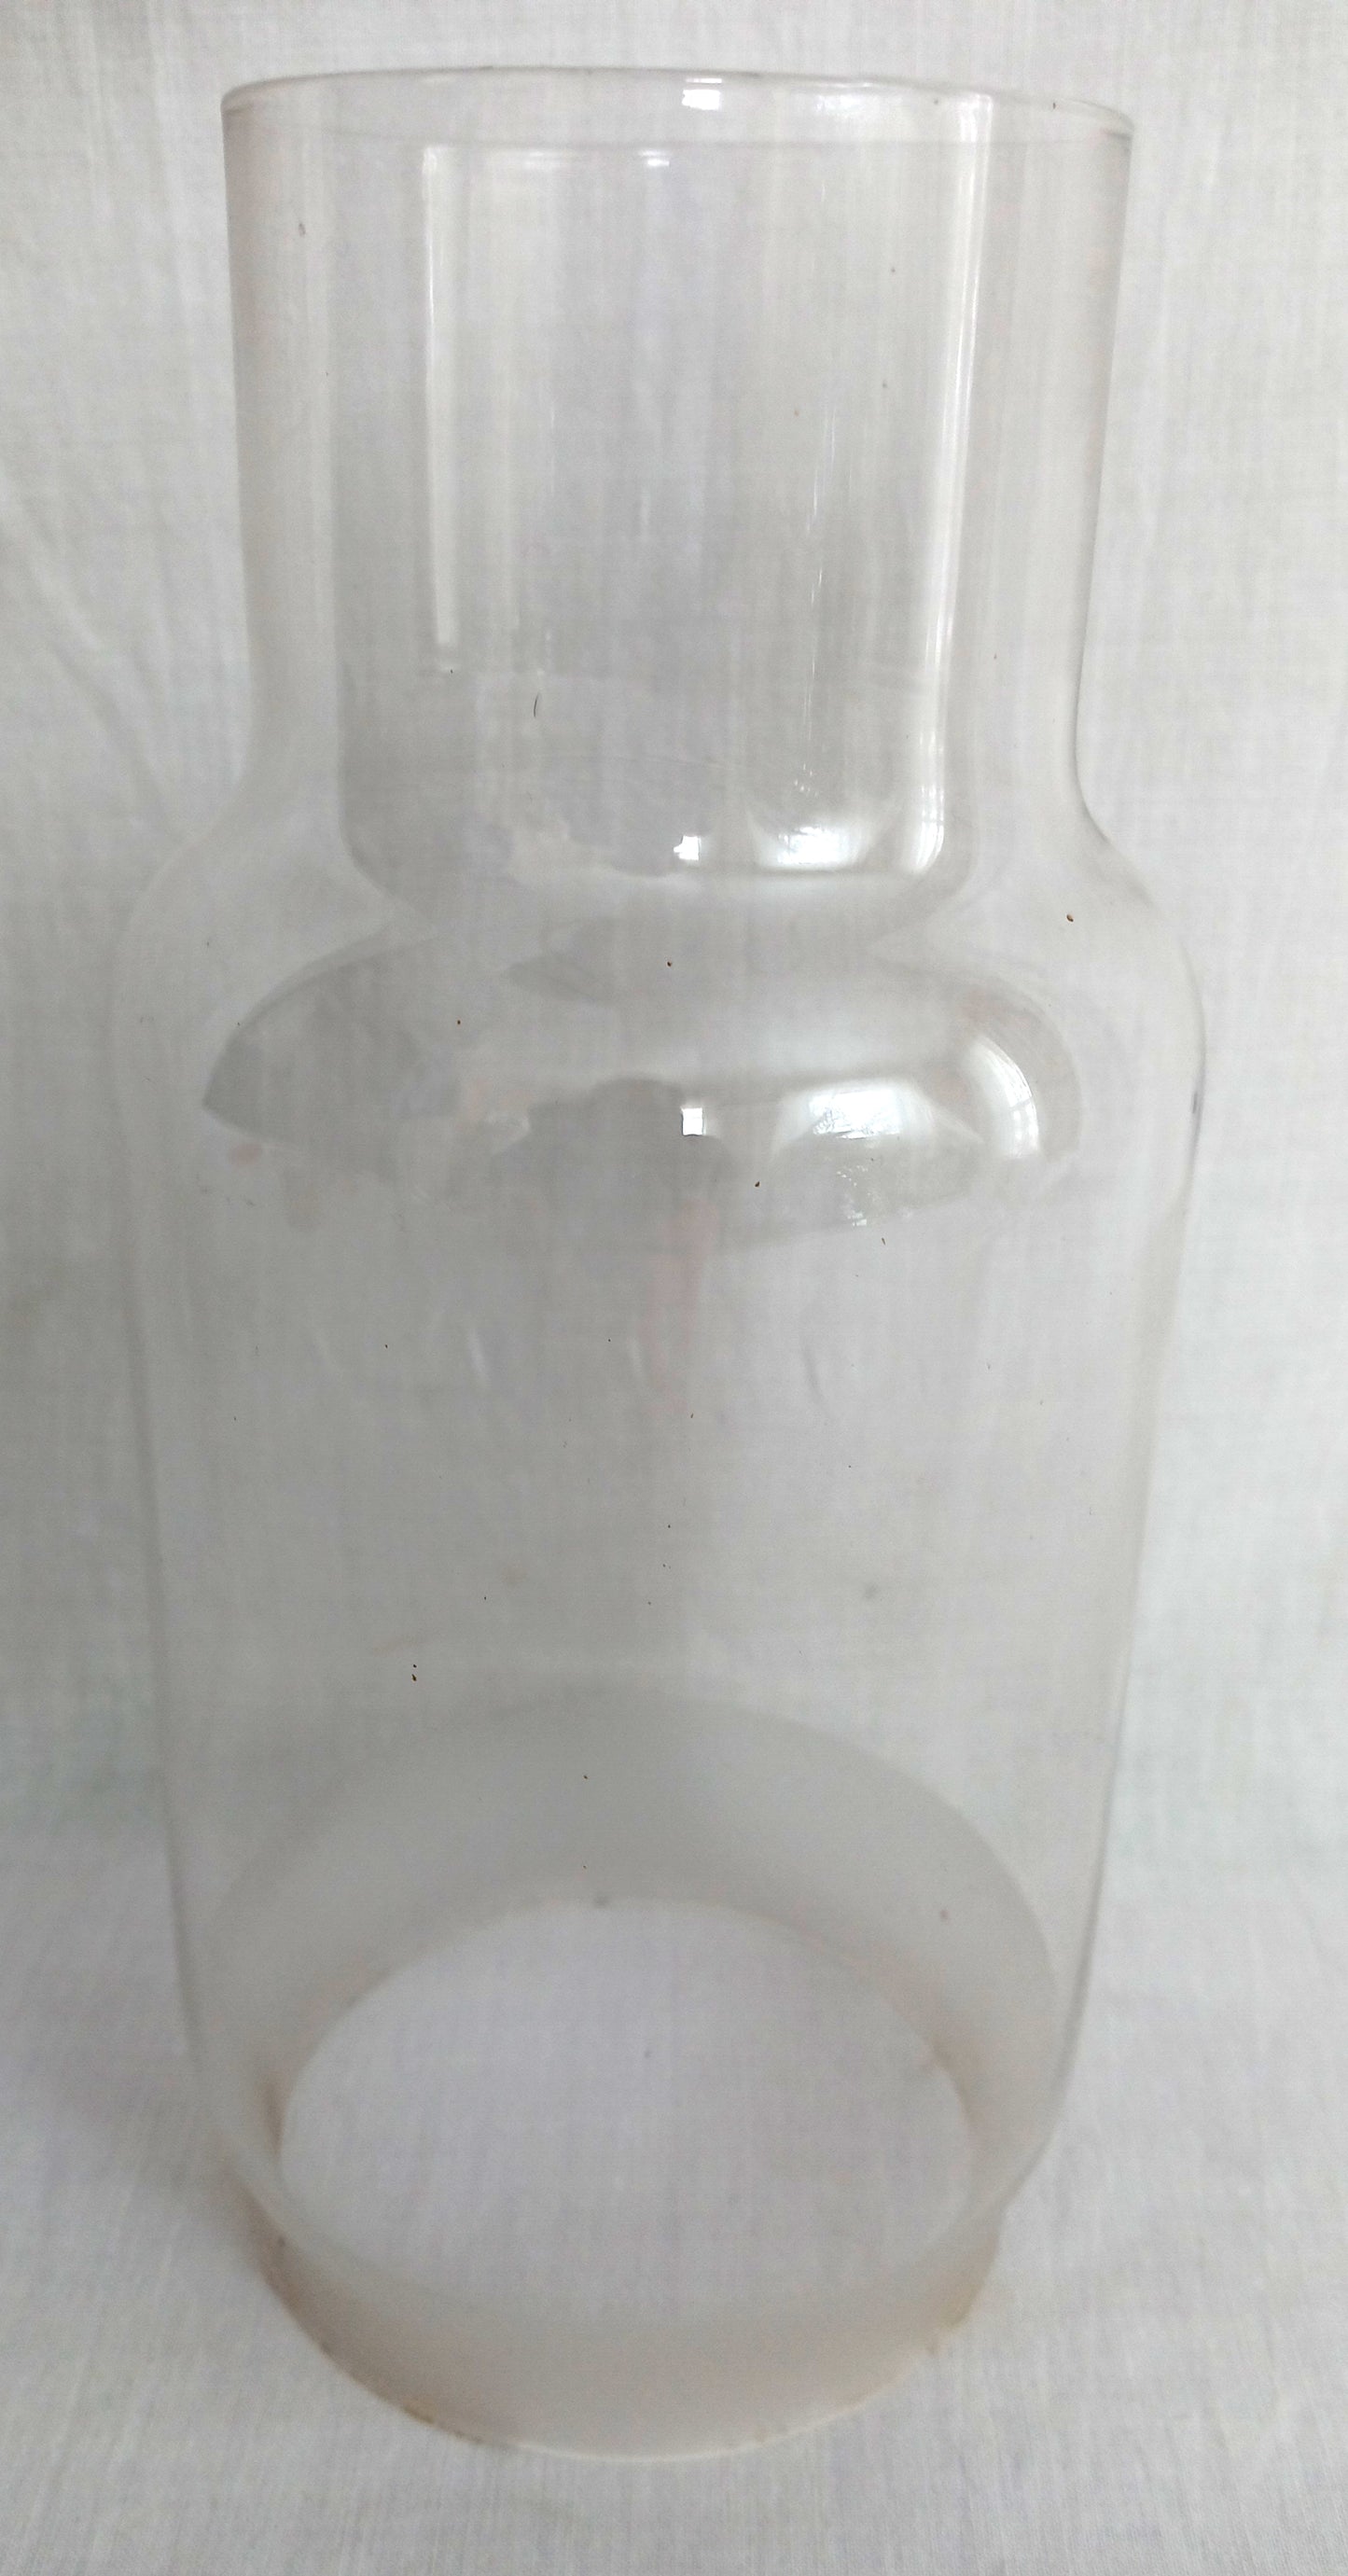 Antique Vintage Clear & Frosted Glass Superior Best Flint Glass Replacement Lampshade for Kerosene Oil Lamp or Candle Holder Retro Chimney